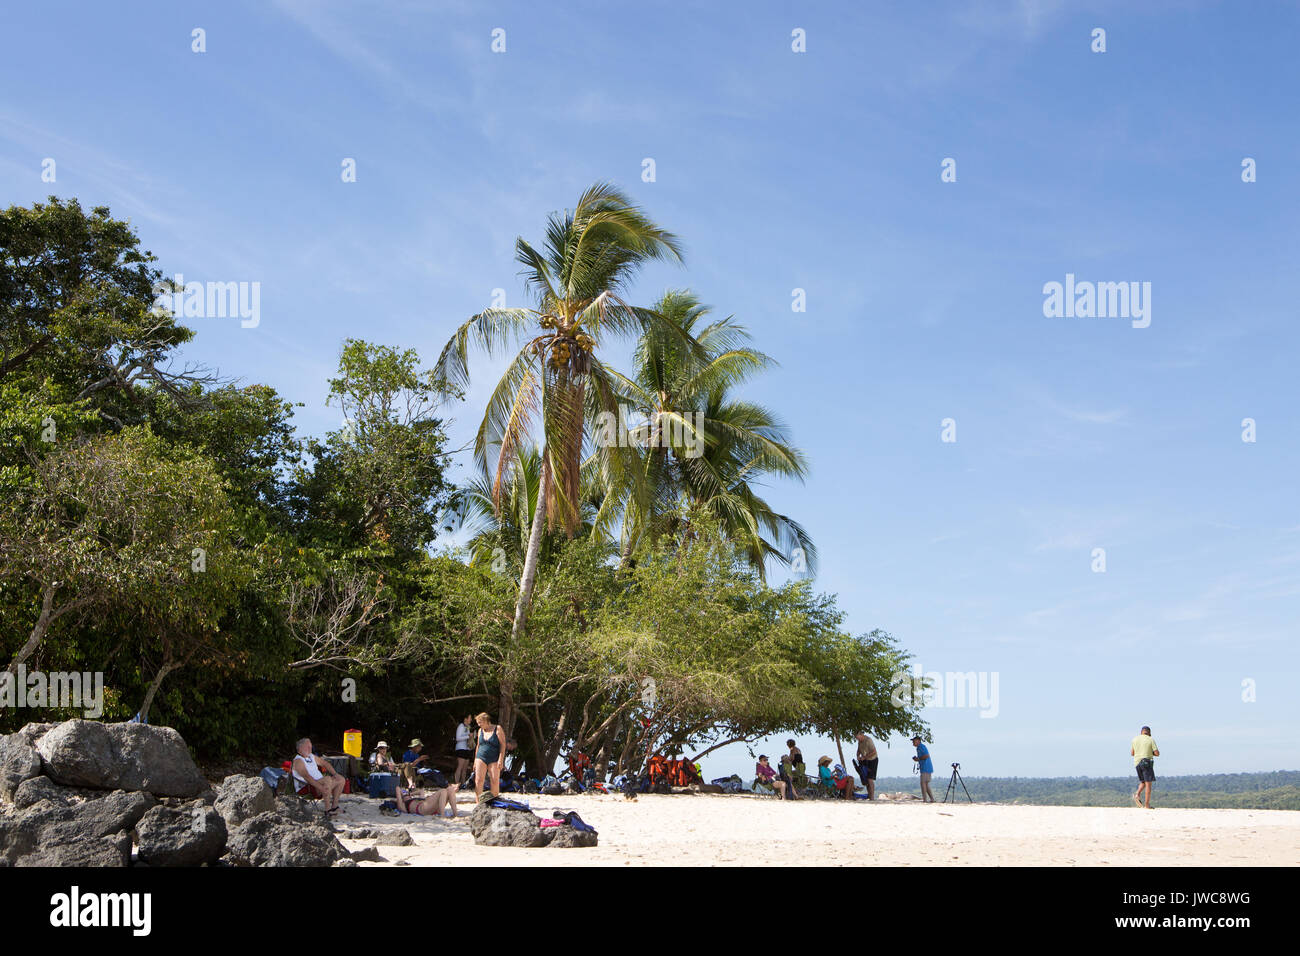 Visitors to Isla Granito de Oro,meaning Little Grain of Gold,sunbathe,relax and photograph on the small island. Stock Photo